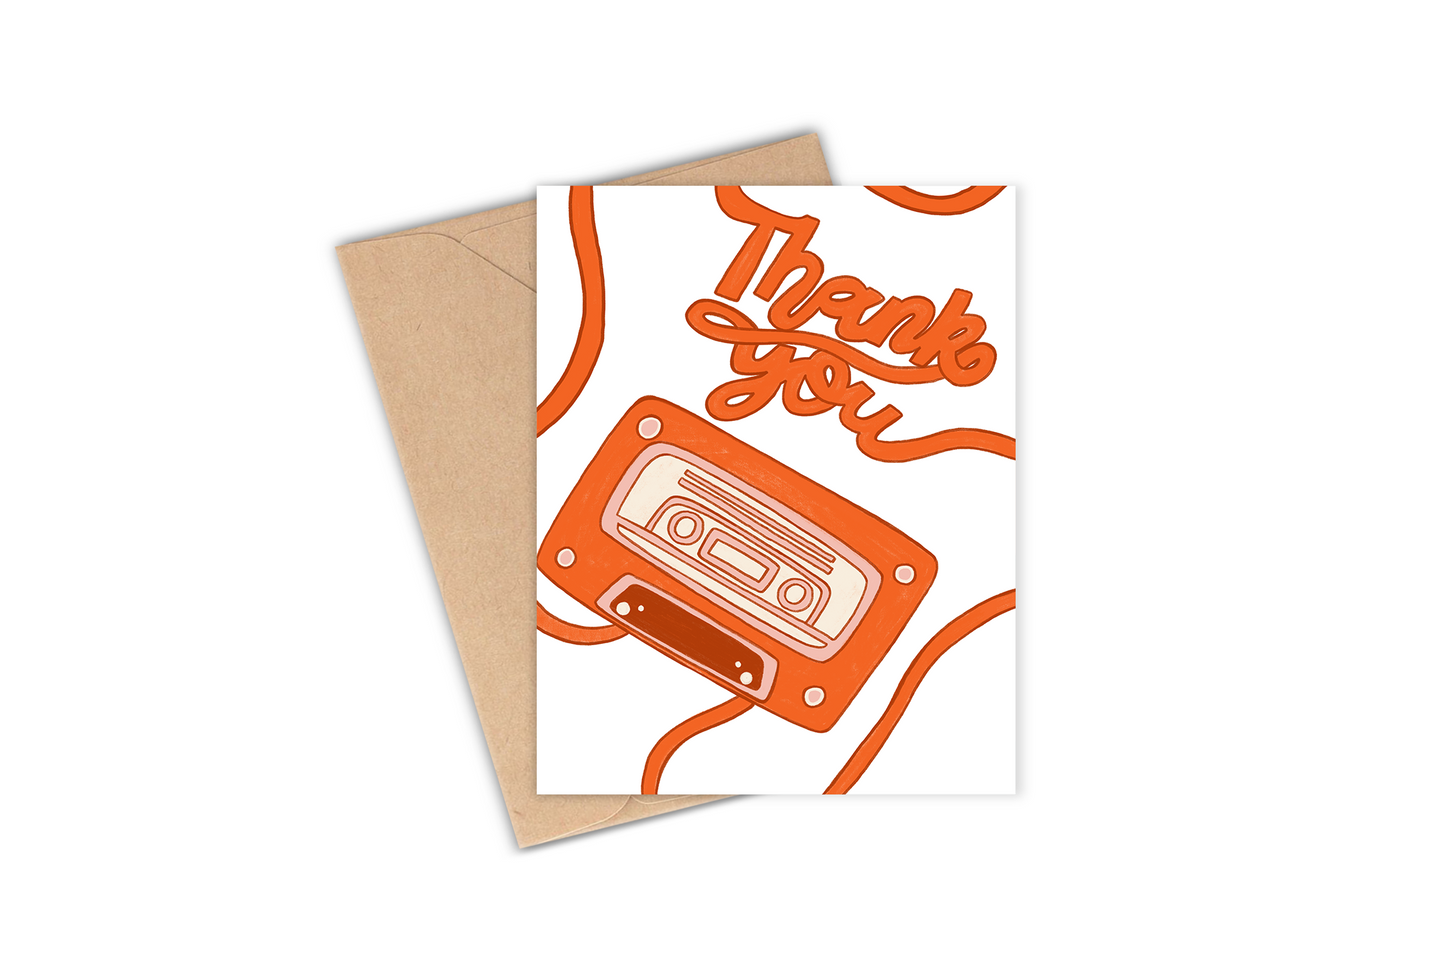 This greeting card is the perfect thank you card for any and every occasion - whether it's a birthday party, wedding, engagement party, or just because!  Details: Hand-illustrated drawing of a vintage/retro looking cassette tape with the phrase "Thank you" with swirls of red tape.